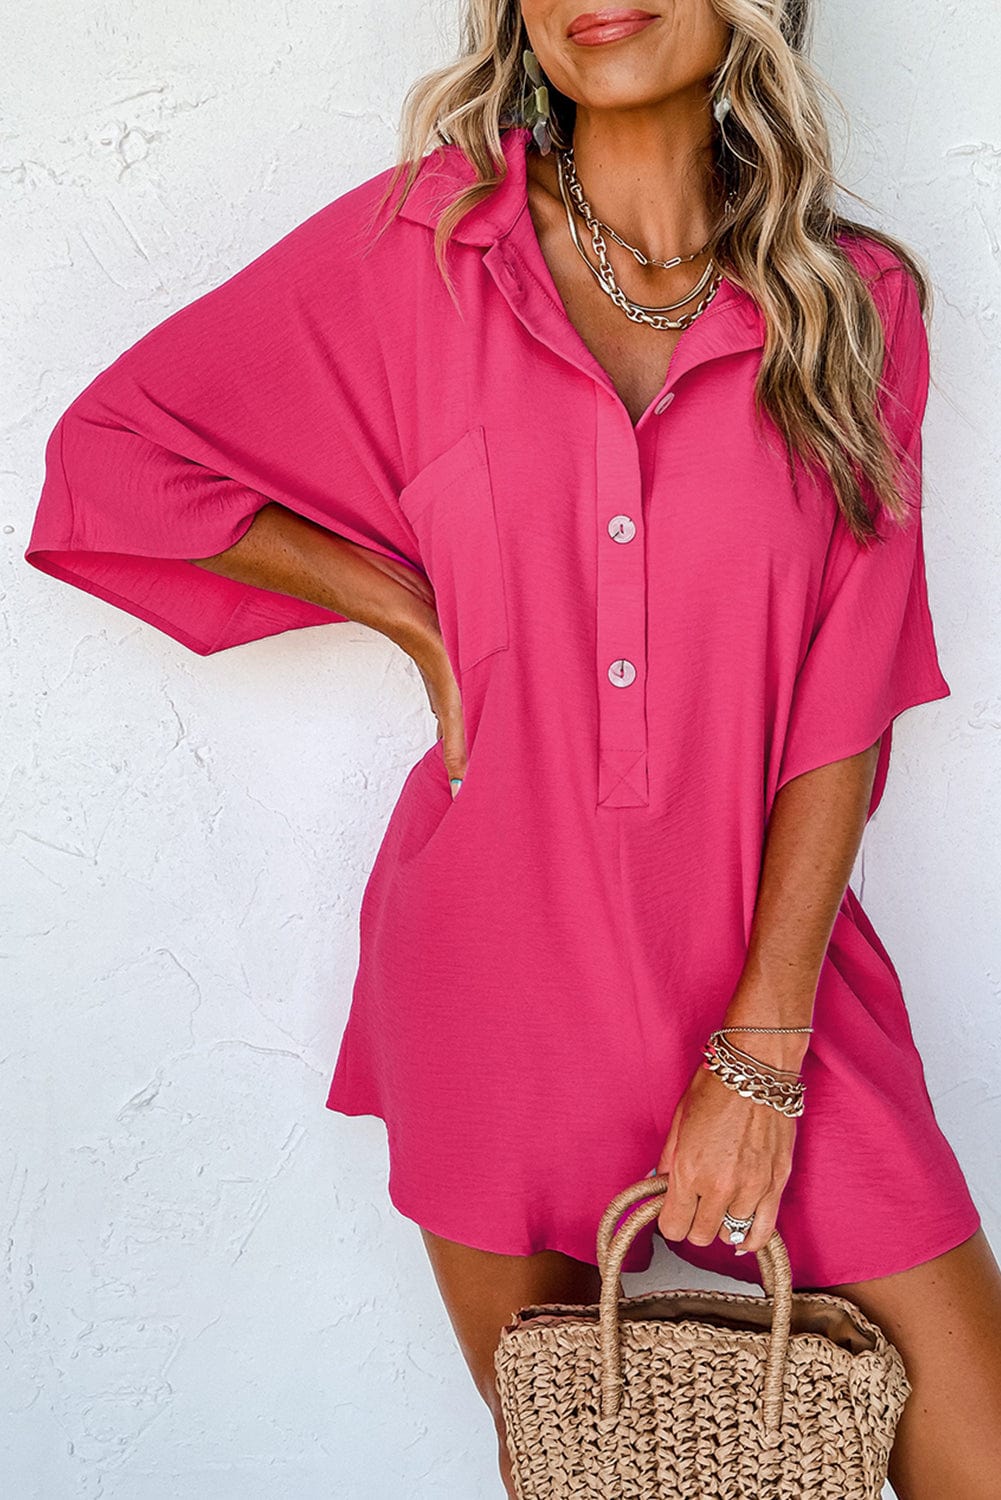 The802Gypsy  Romper Bright Pink / S / 100%Polyester TRAVELING GYPSY-Half Button Loose Romper